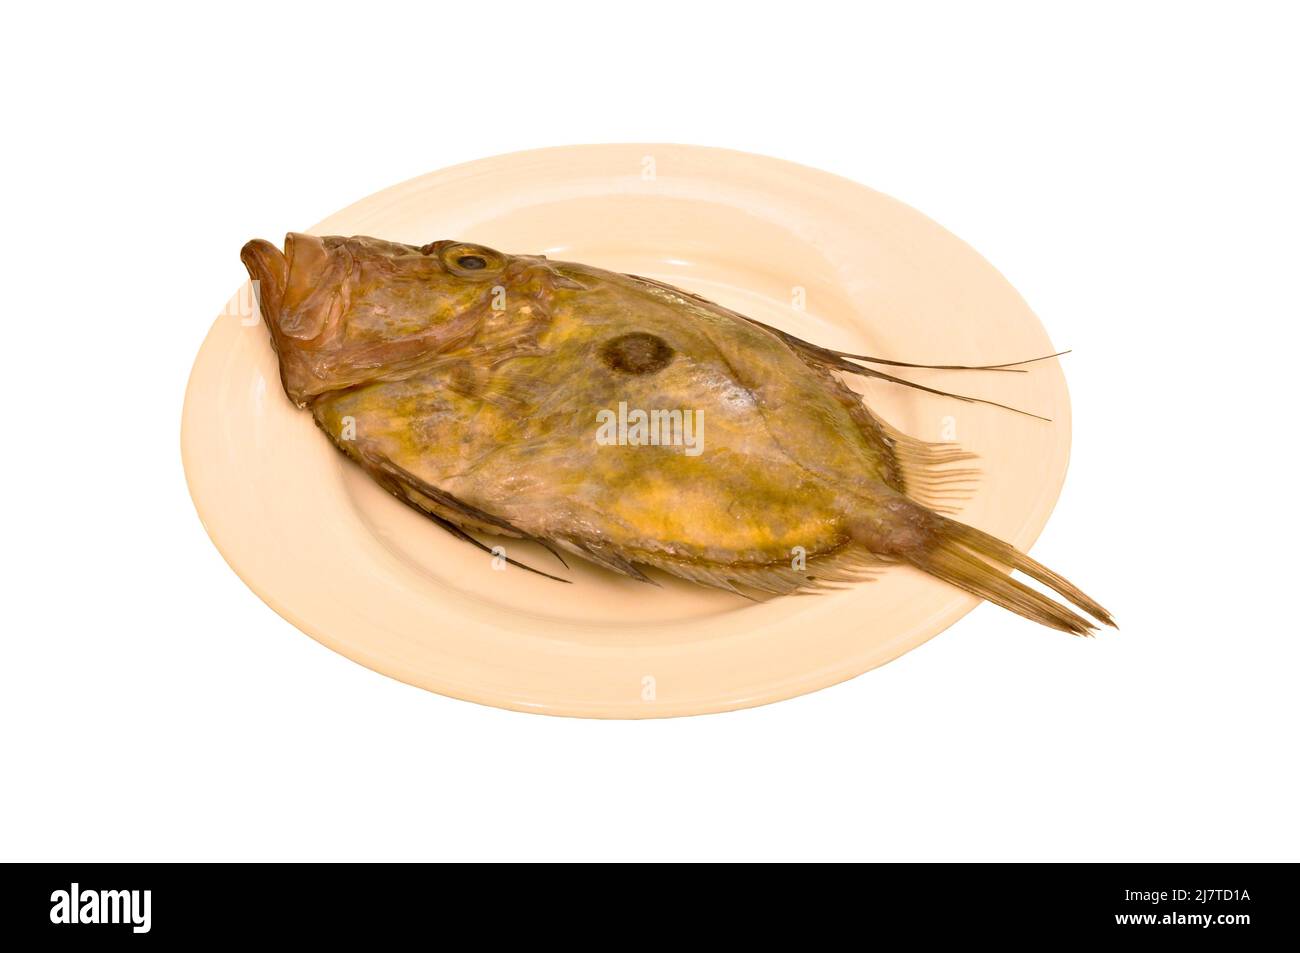 Cleaned and ready to cook fresh fish dulger, dulger fish, in porcelain plate Stock Photo